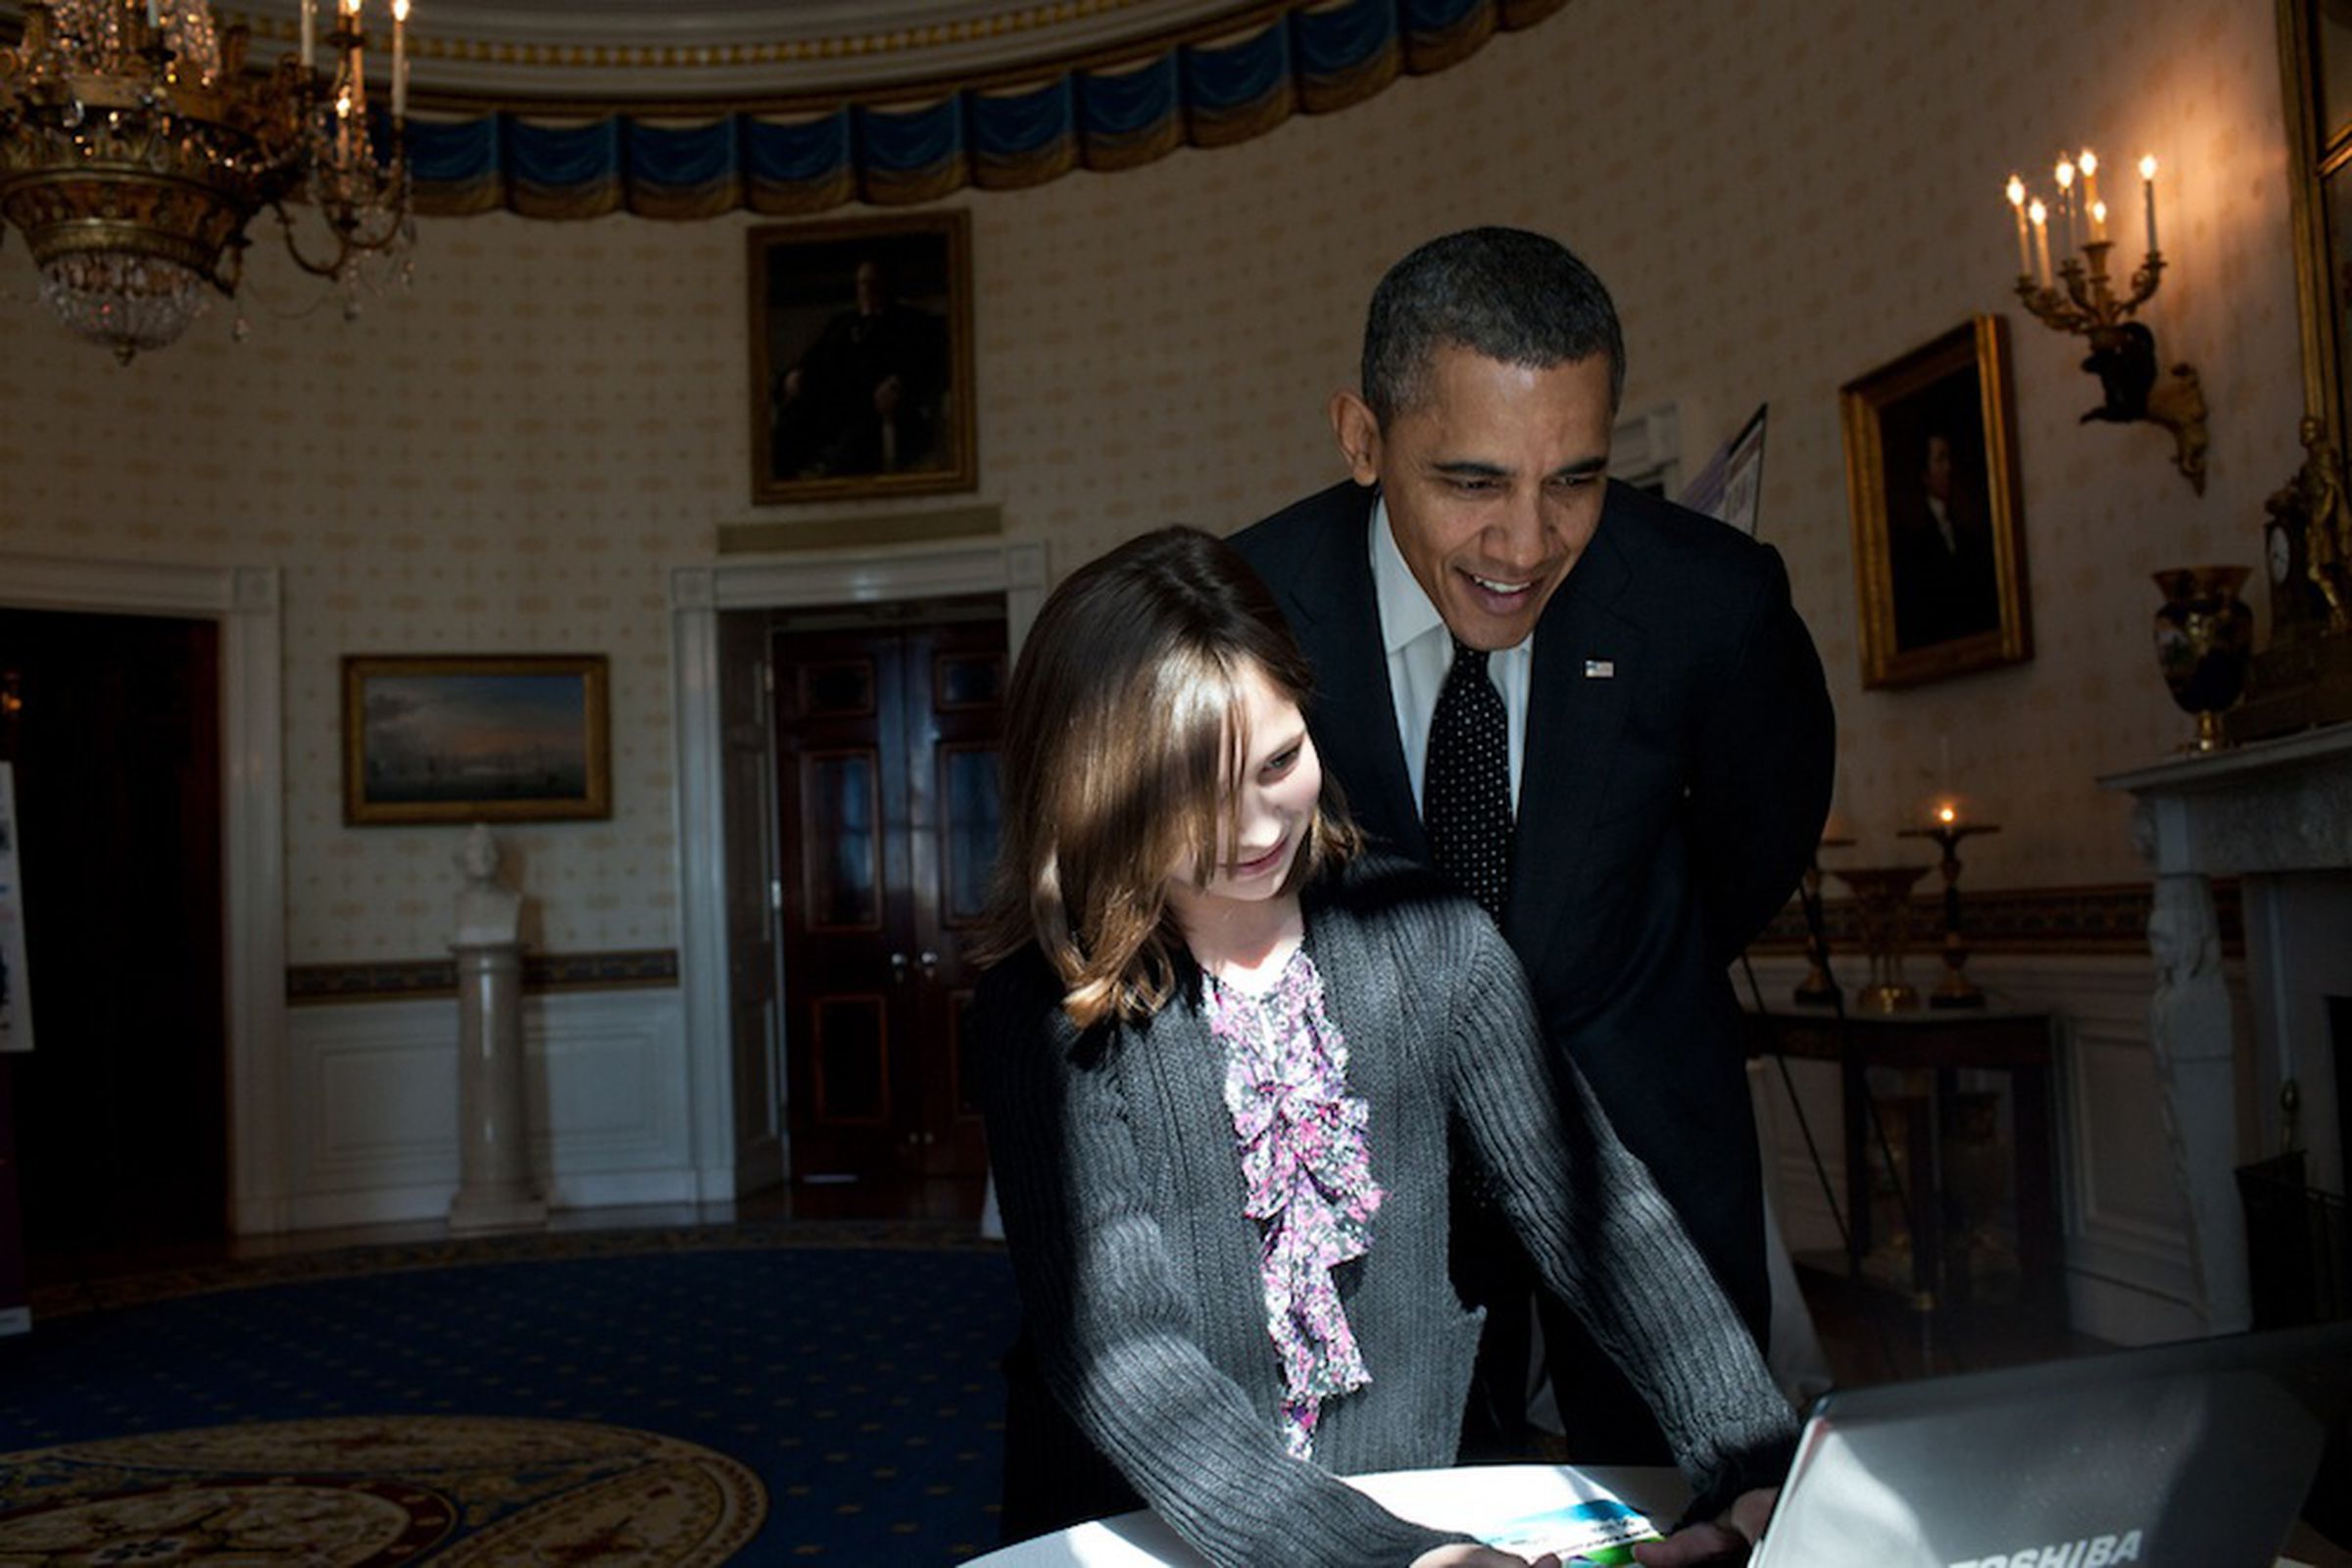 President Obama looks over shoulder at laptop (Credit: Pete Souza/The White House Flickr) 